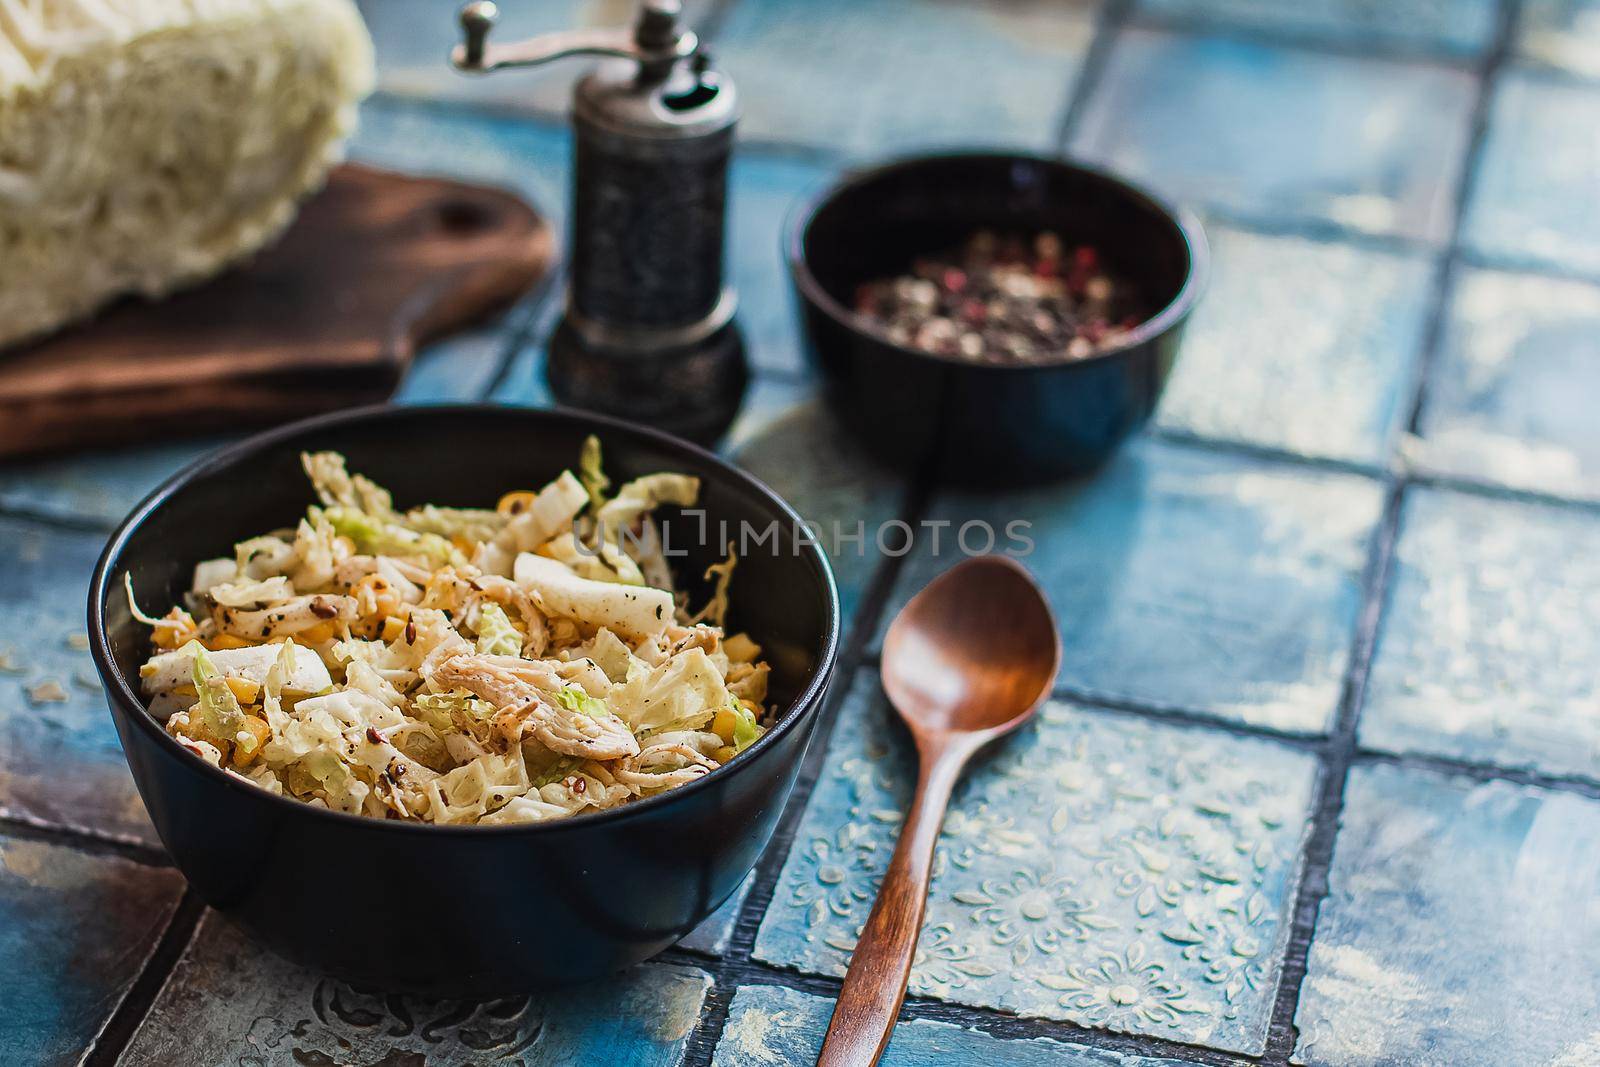 Salad with cabbage, eggs, corns and meat on the plate on rustic tiled table by mmp1206